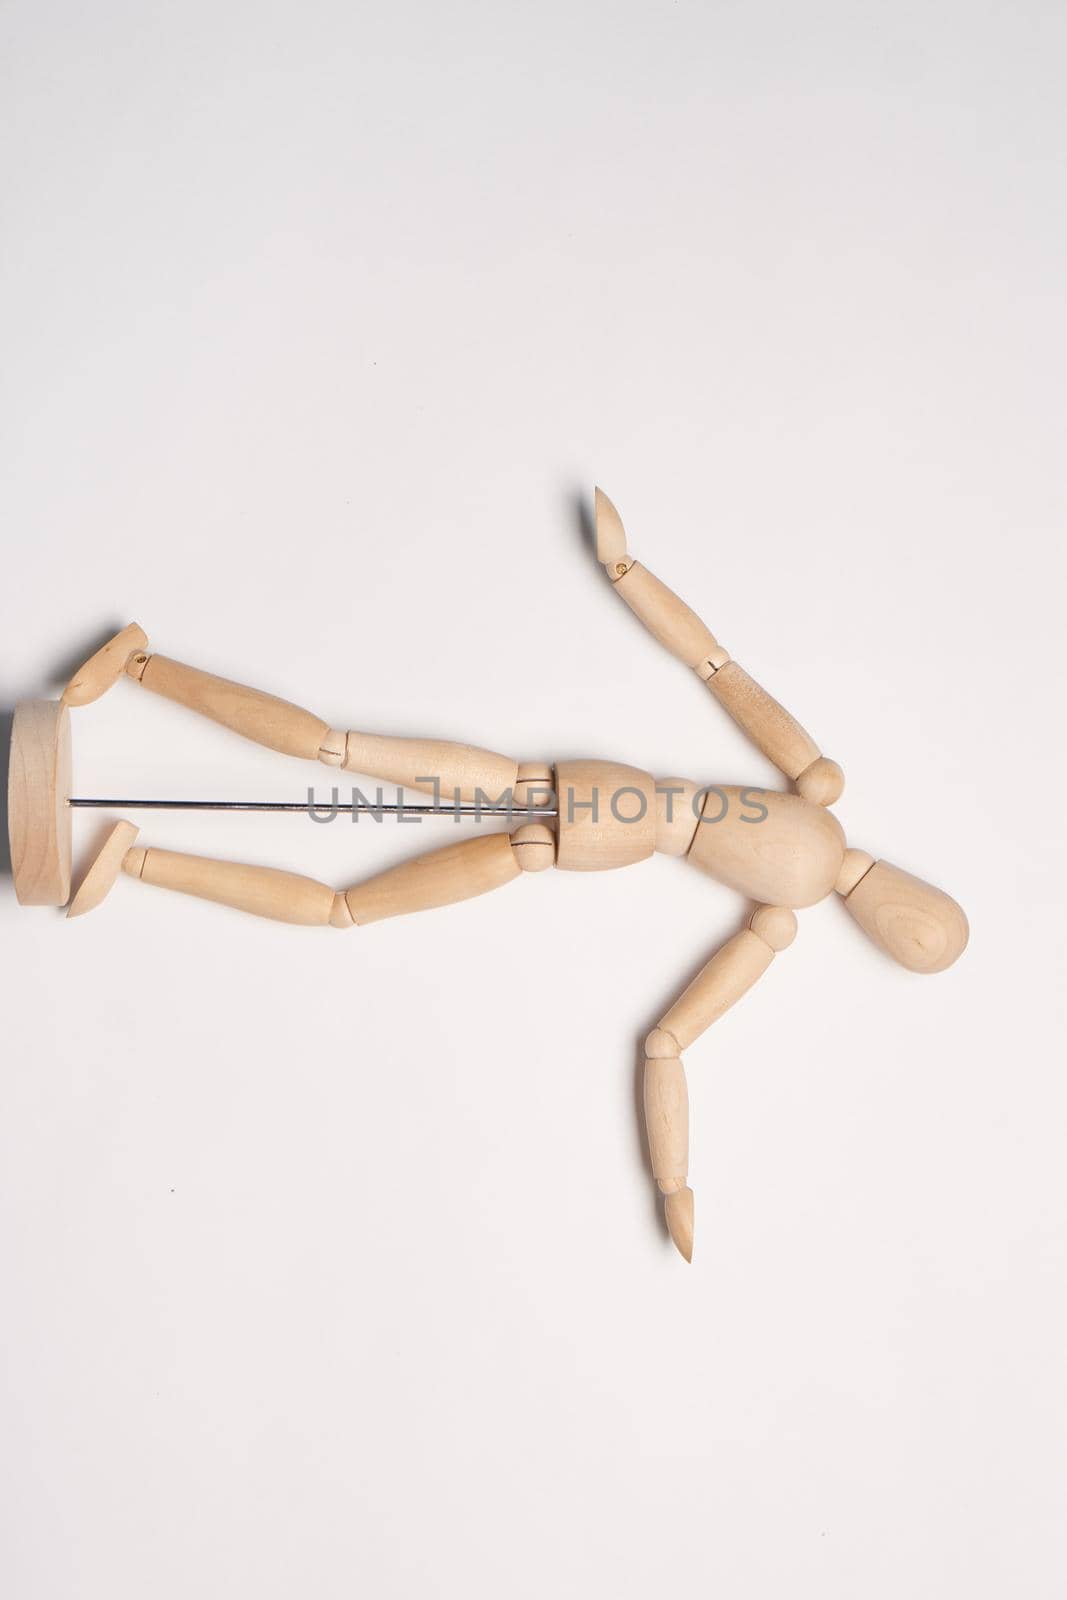 wooden mannequin object close up light background by Vichizh